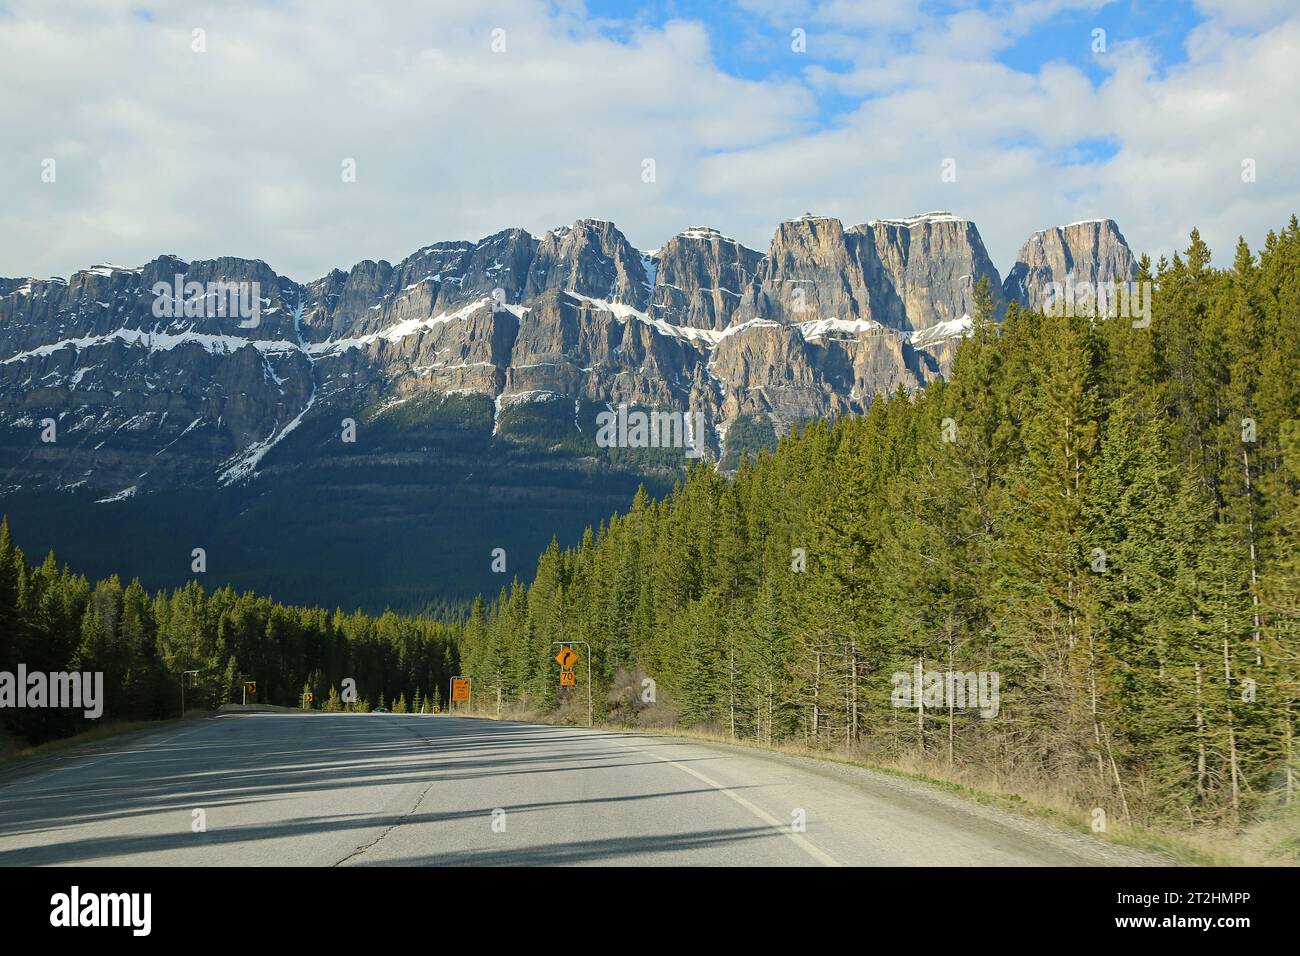 The road and Castle Mountain, Canada Stock Photo